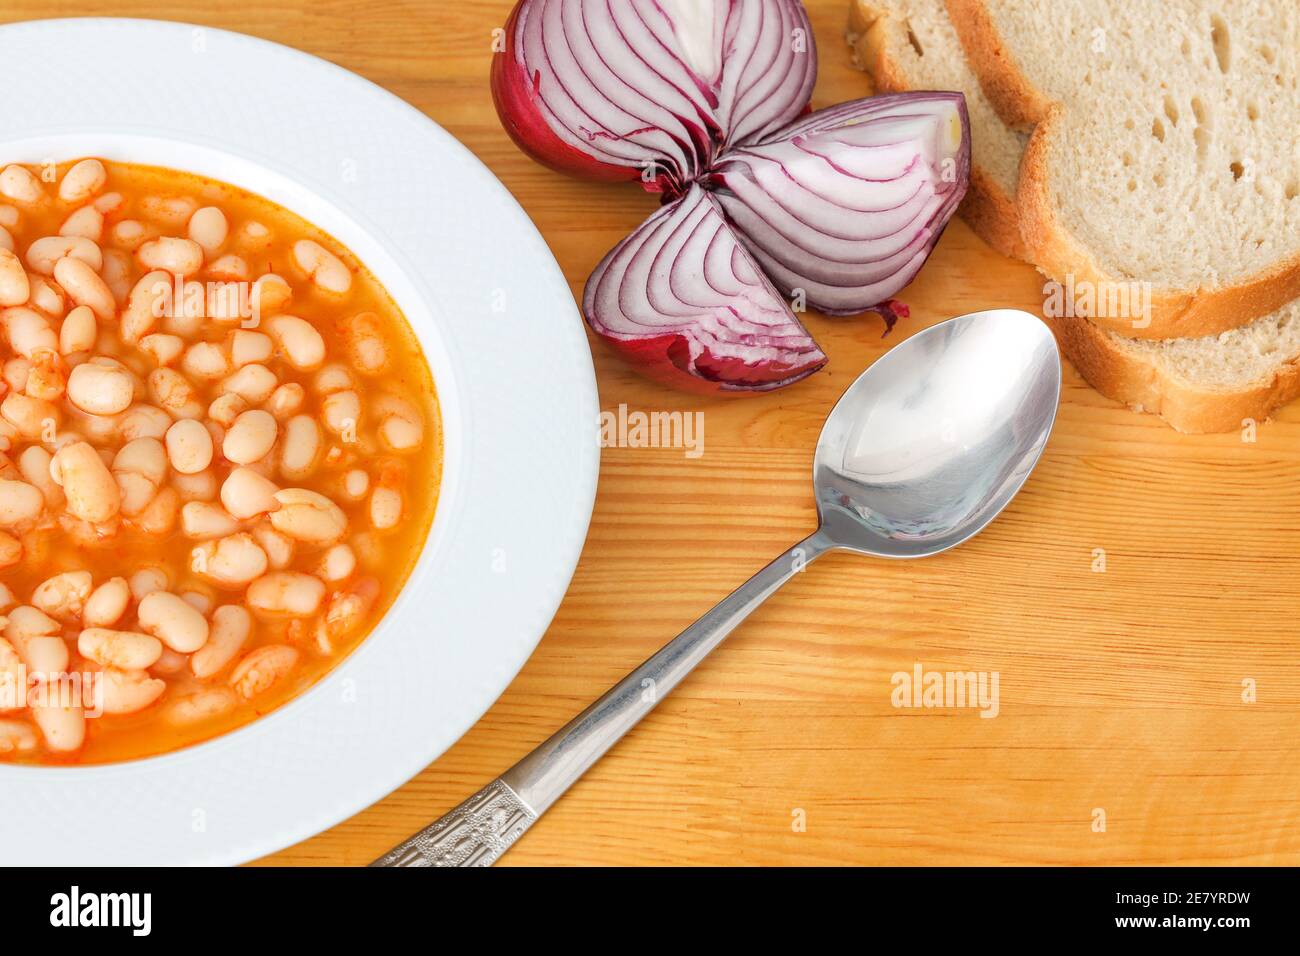 Traditional Turkish Haricot bean food served with onion and bread on wooden background. Stock Photo